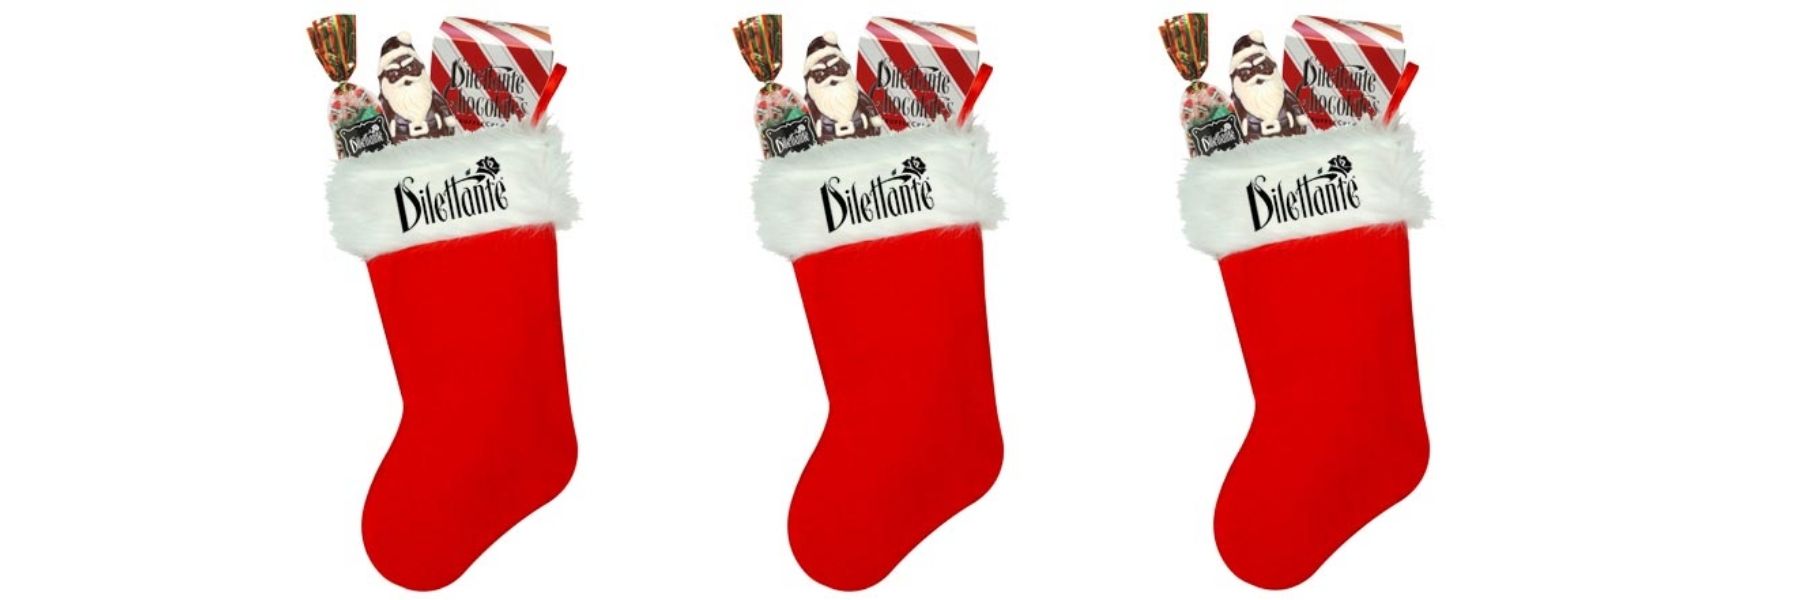 Dilettante Chocolates Packaged in Three Red Stockings Against a White Background